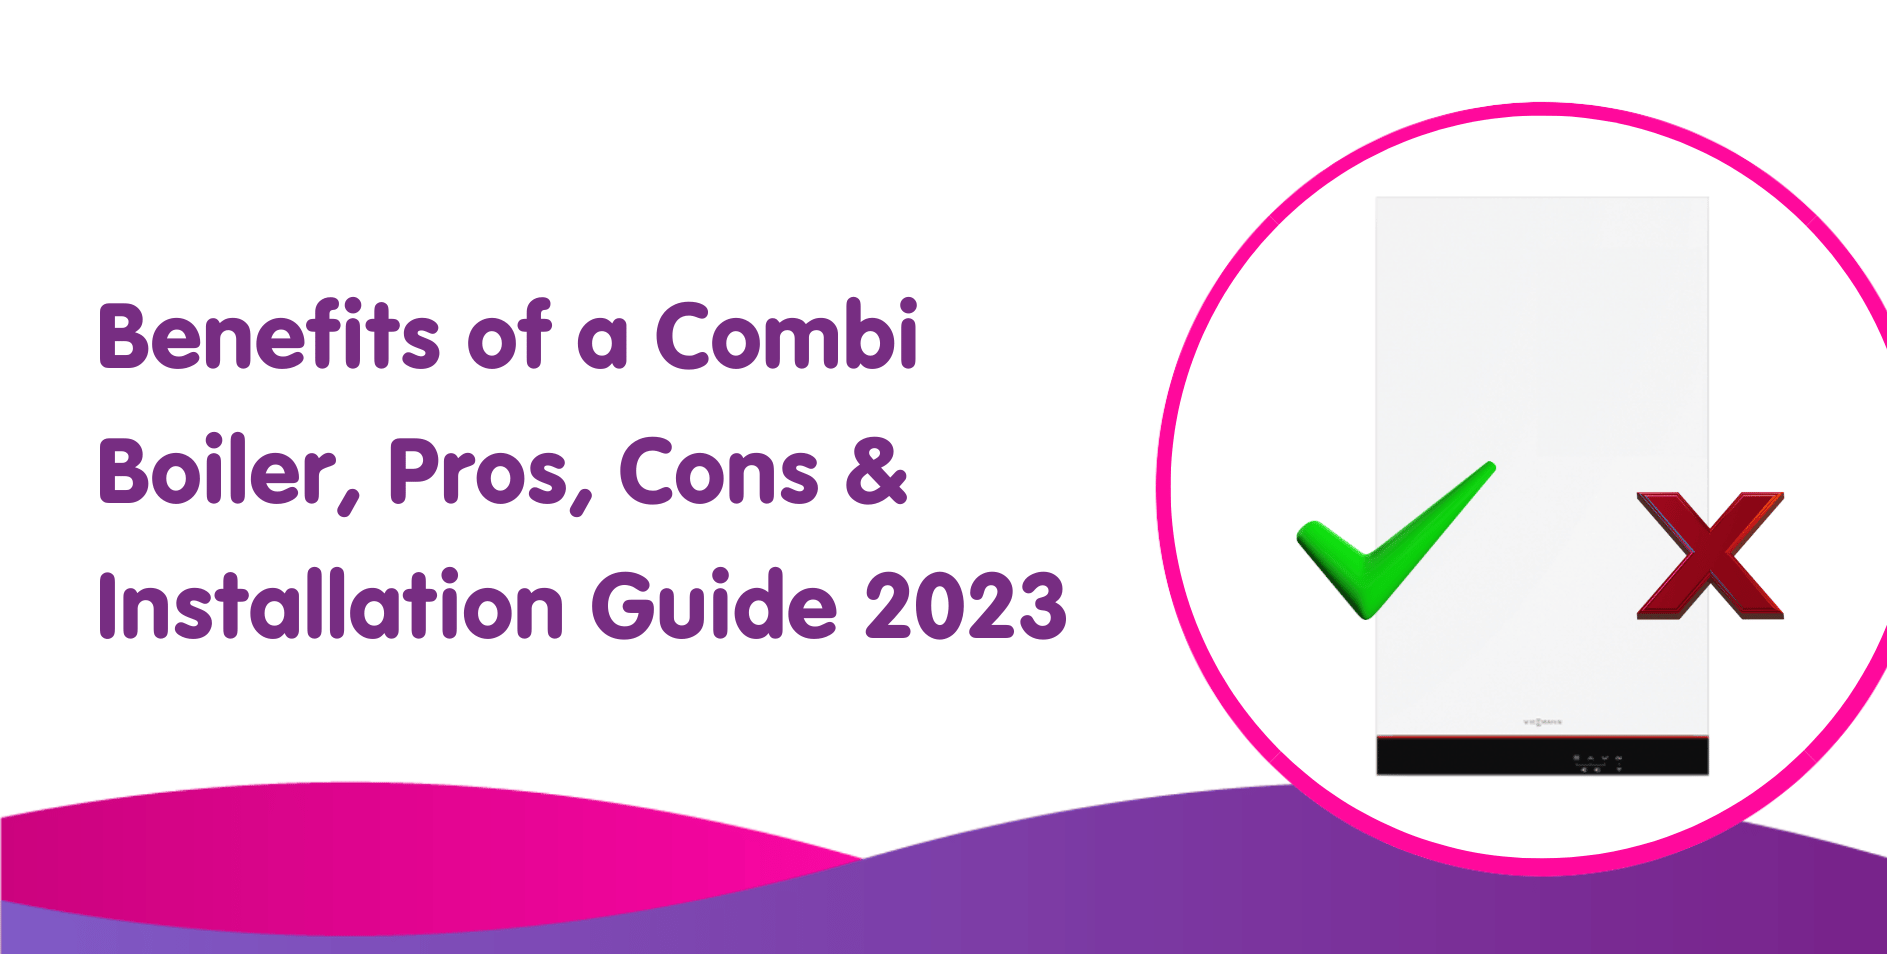 Benefits of a Combi Boiler, Pros, Cons & Installation Guide 2023